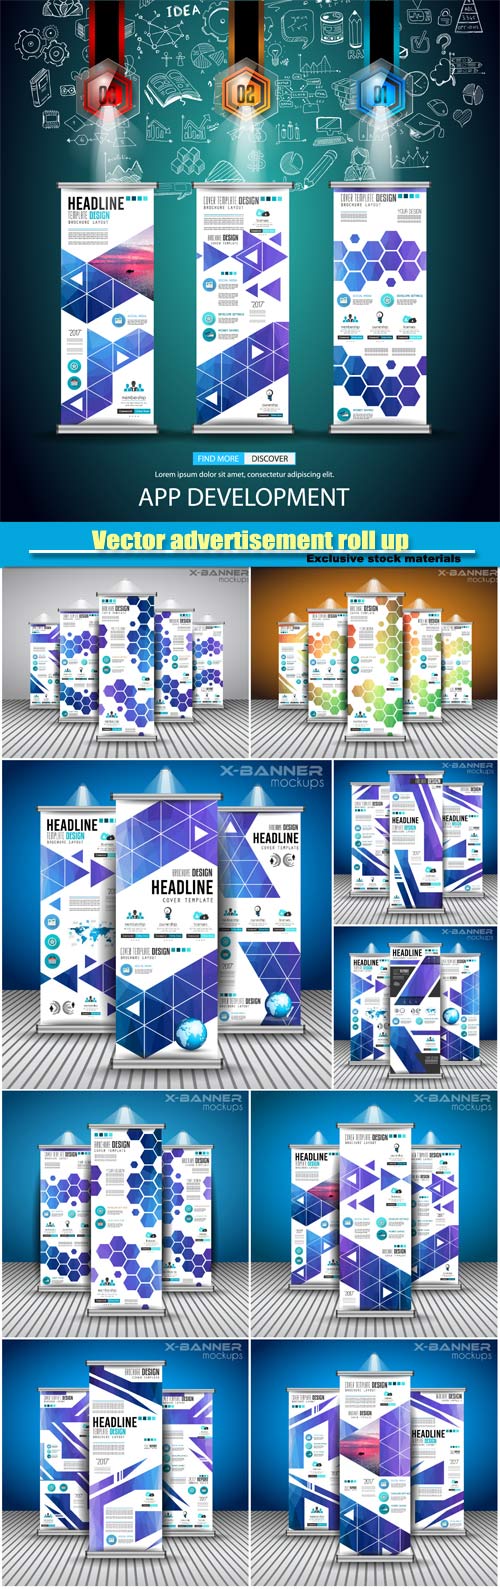 Vector advertisement roll up business flyers and brochure banners with vertical design